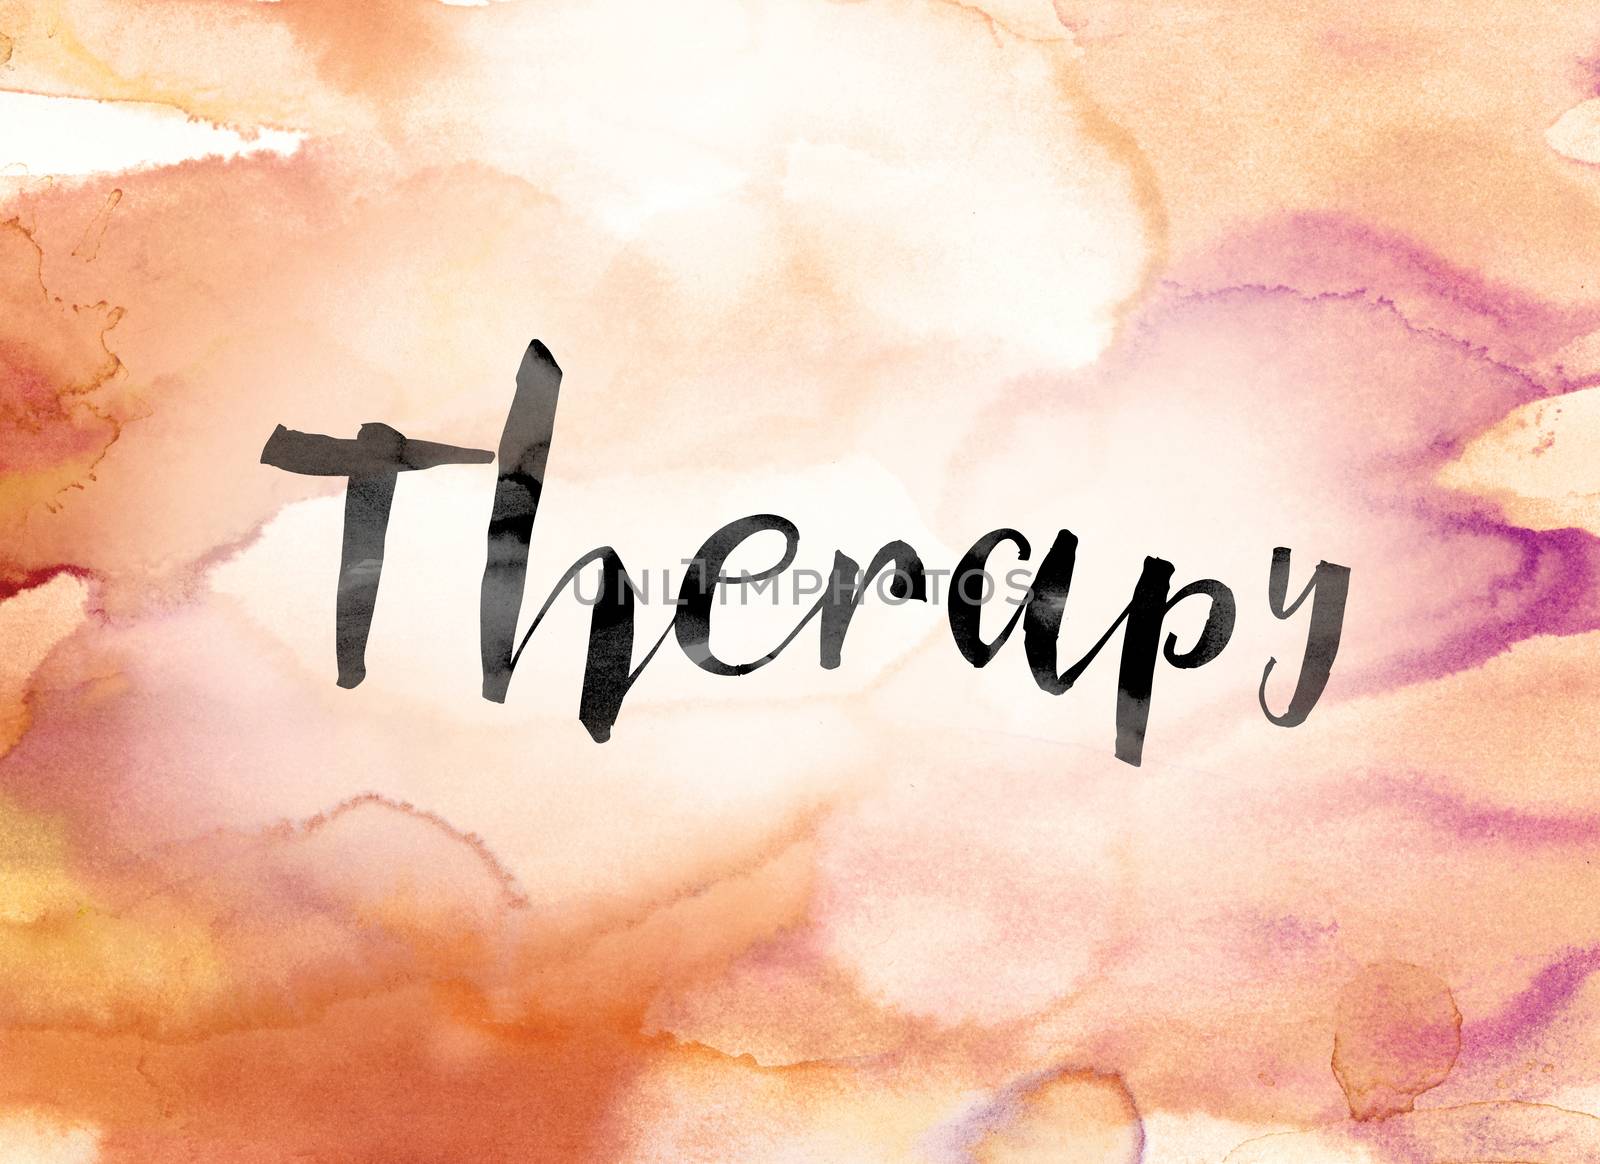 Therapy Colorful Watercolor and Ink Word Art by enterlinedesign